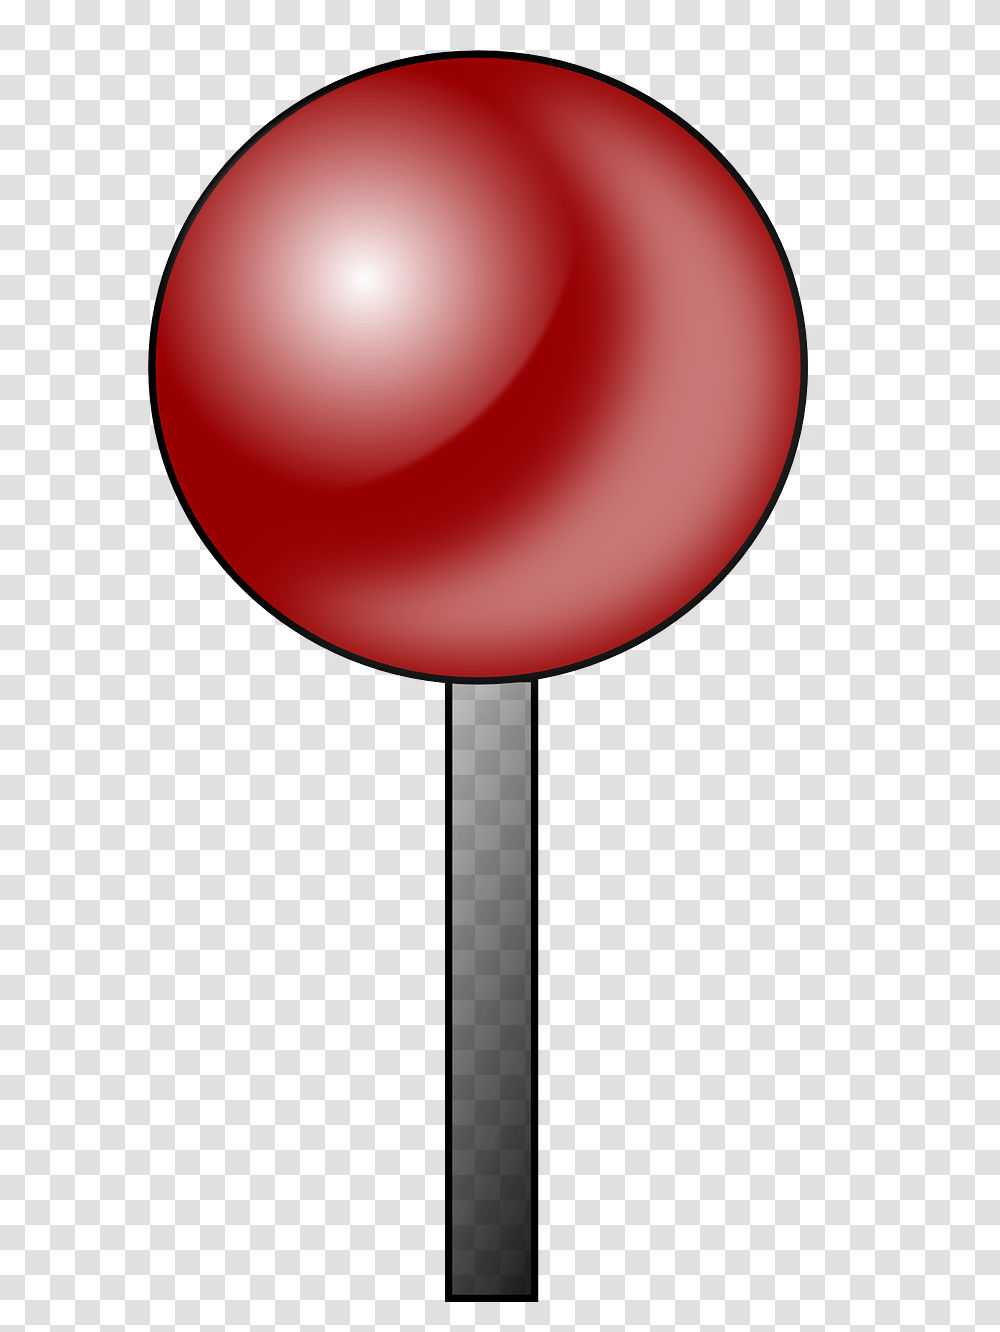 Lollipop Free To Use Cliparts Hnh Nh Hnh Ko Mt, Lamp, Food, Candy, Balloon Transparent Png